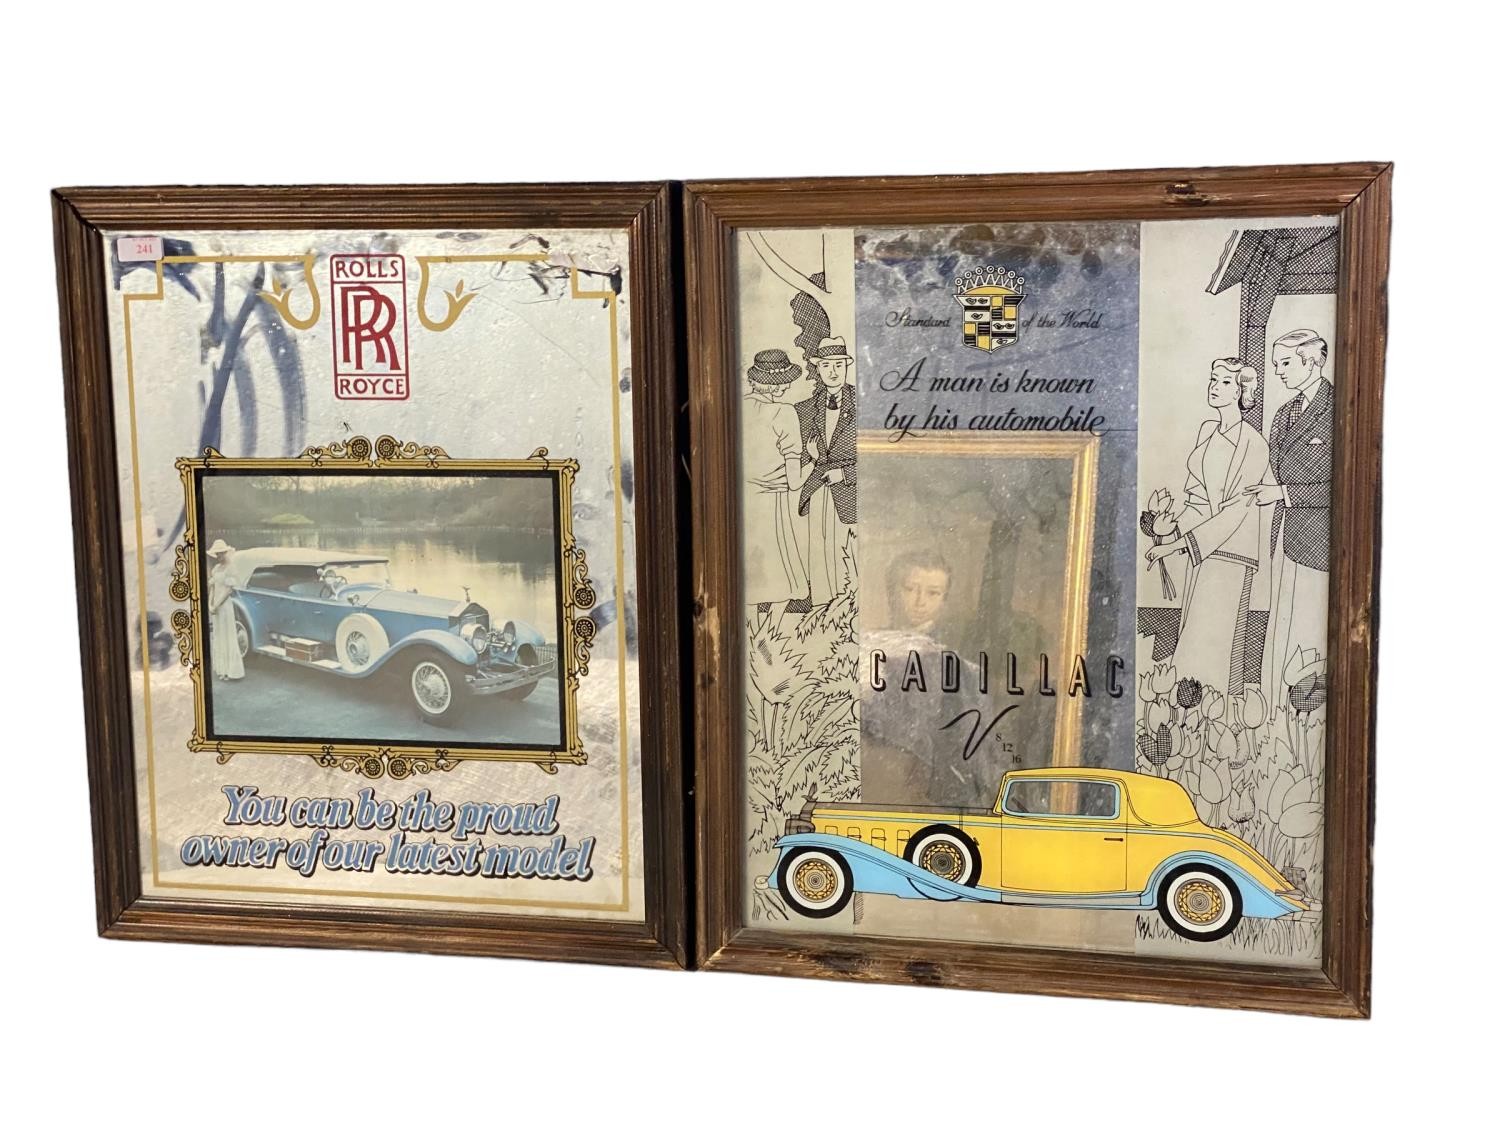 Pair of wall mirrors, advertising Rolls Royce and Cadillac, 51.5 x 41cm, some wear to frame